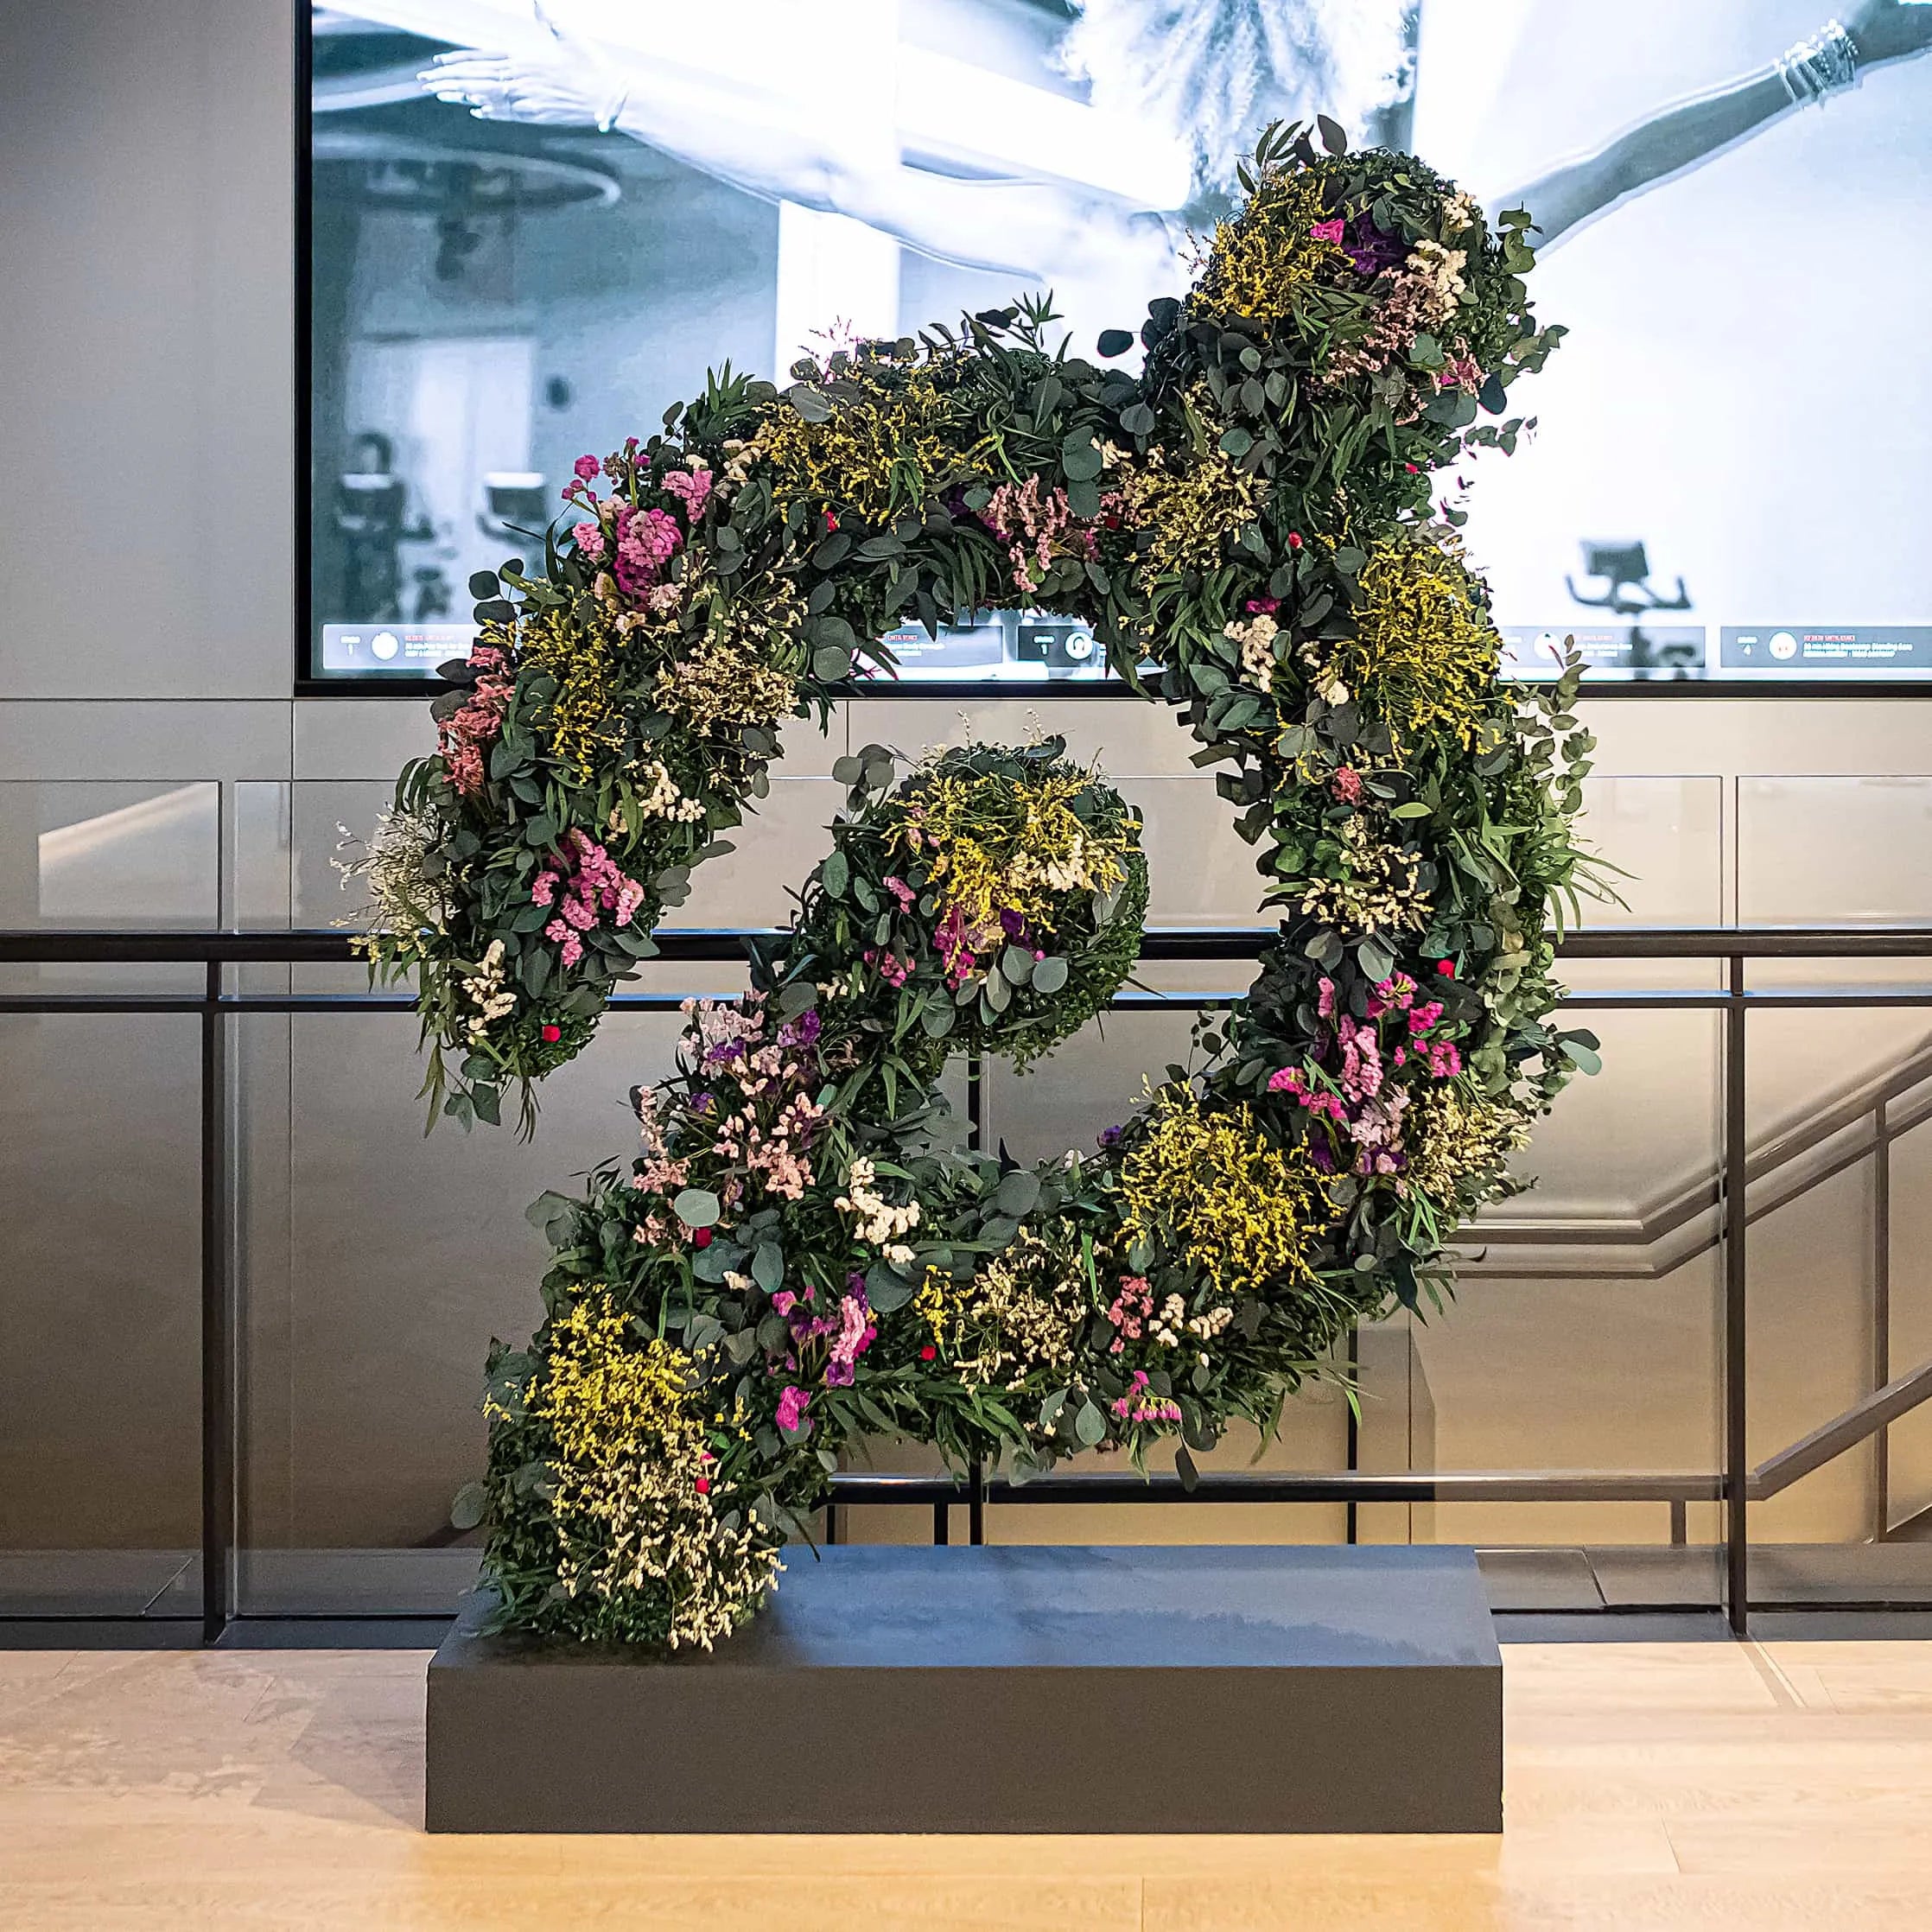 For Peloton we created a bespoke floral installation made in the shape of their distinctive logo, using only sustainable fresh and forever flowers